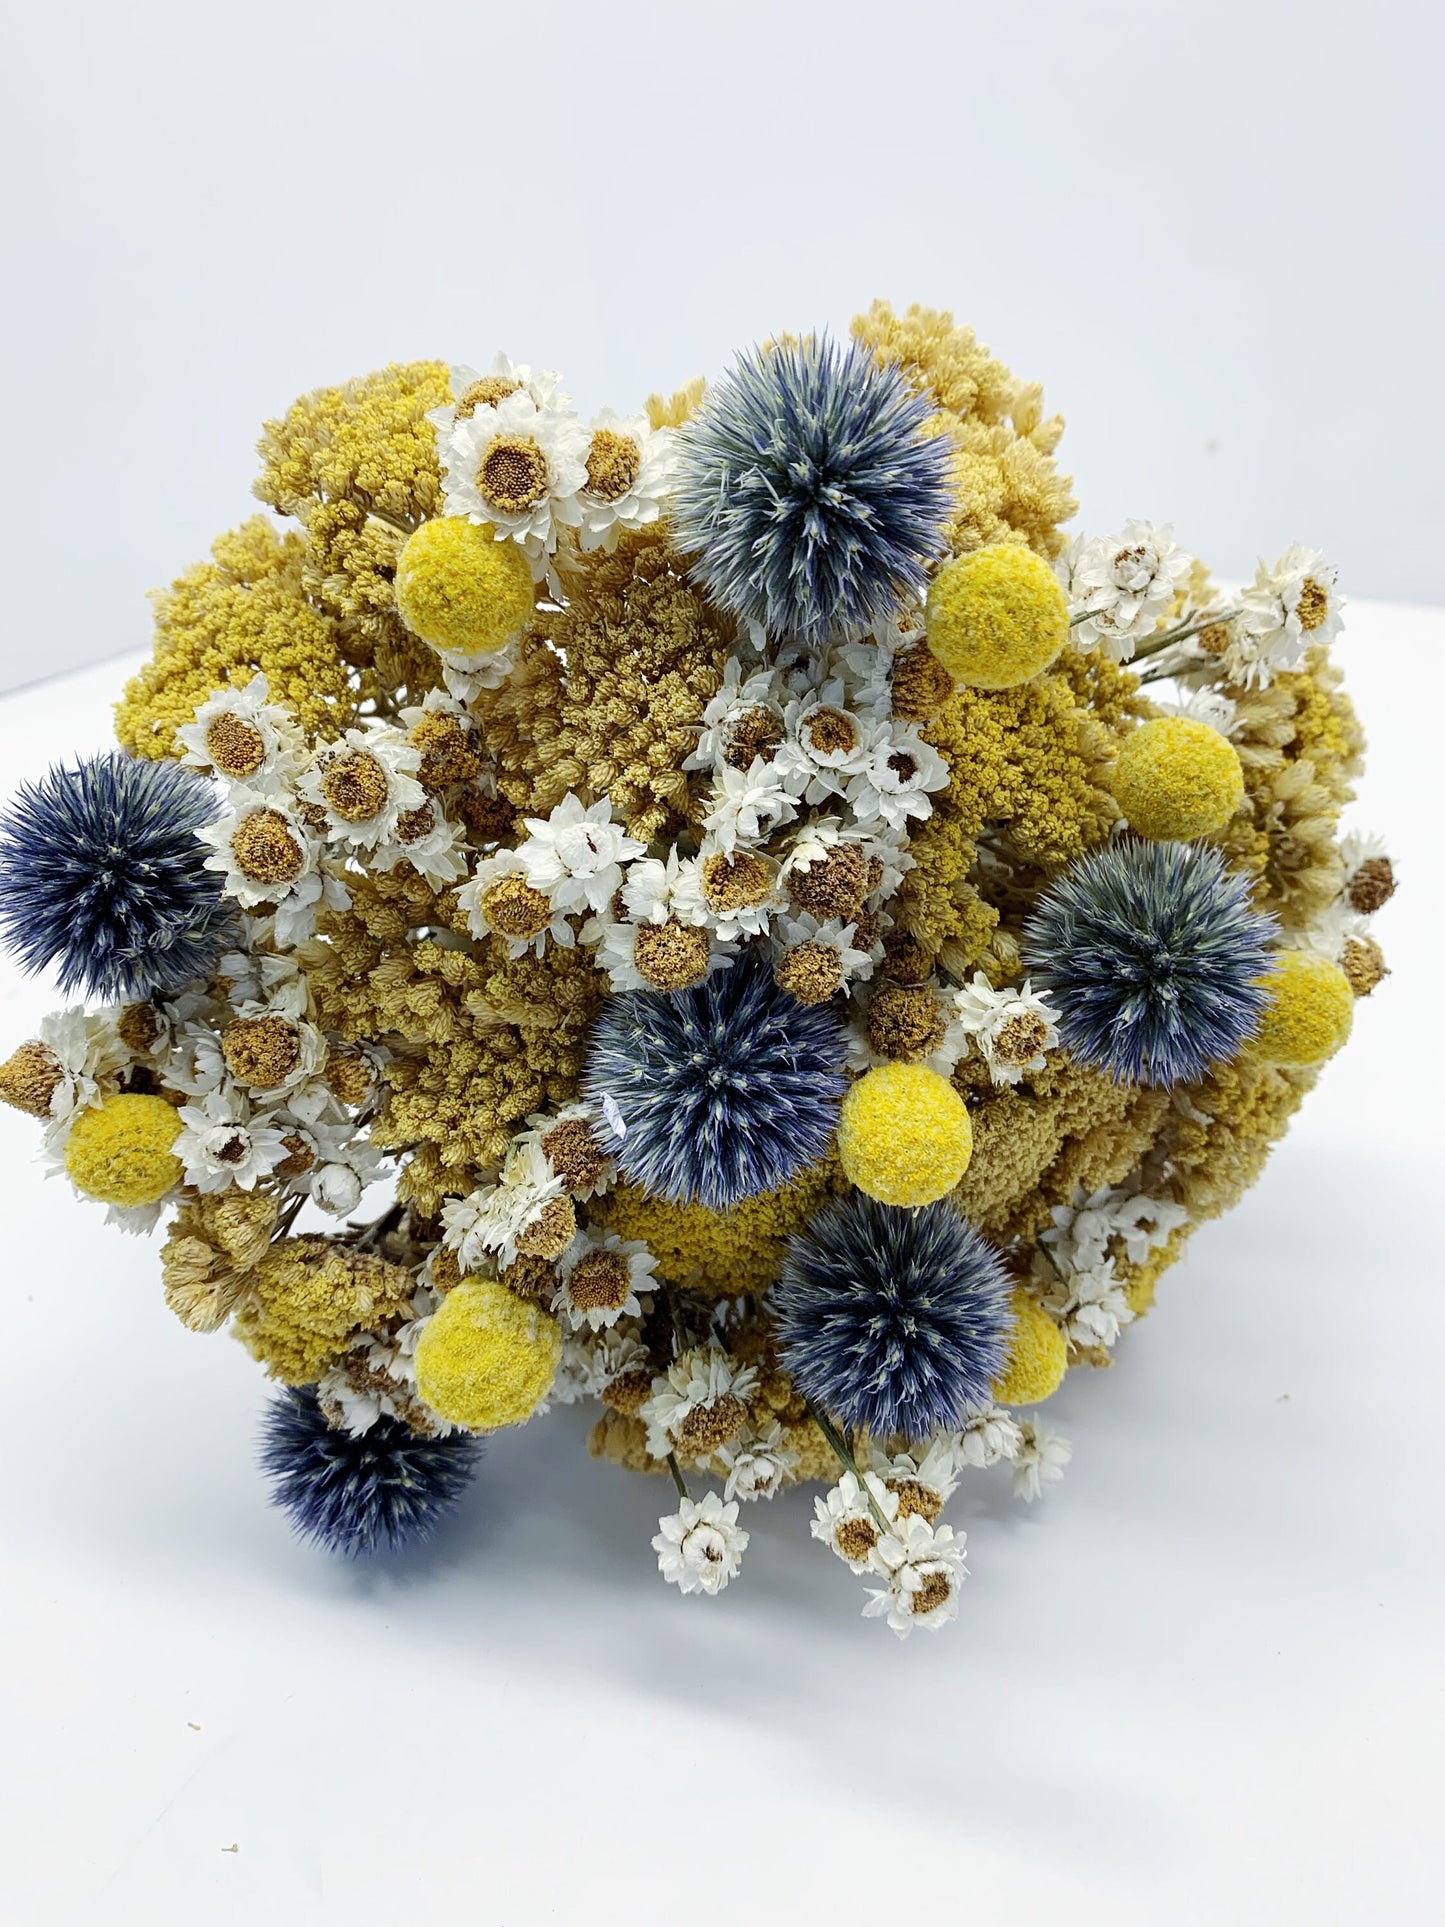 Summer Collection, Bouquet, Dried Flowers, Preserved, Bridal, Wedding, Floral, Colorful, Bridesmaid, Yellow yarrow, blue, globe thisle